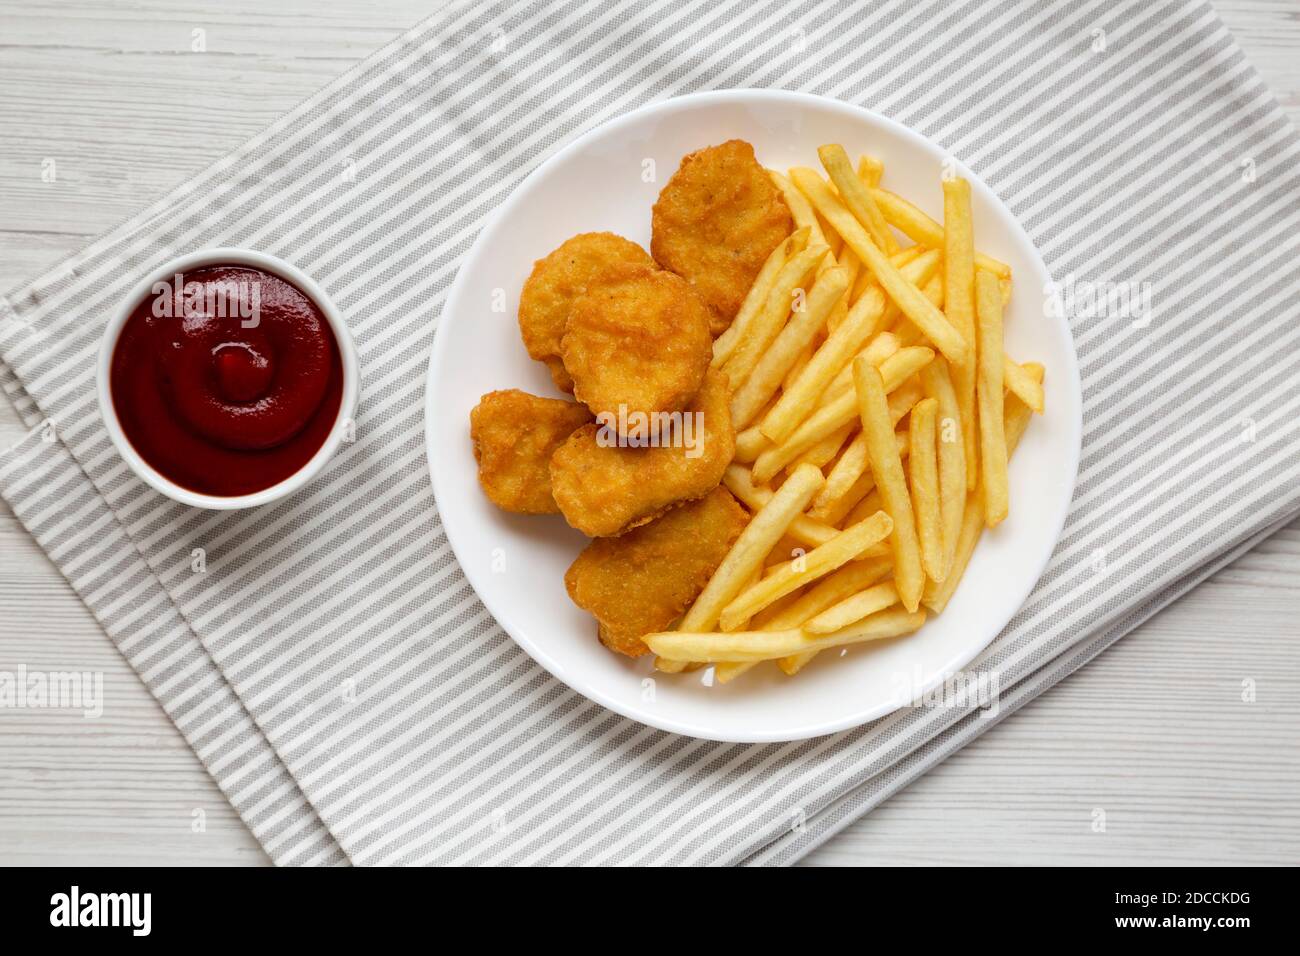 Page and 36 Alamy photography - Chicken images stock - food nuggets hi-res fast